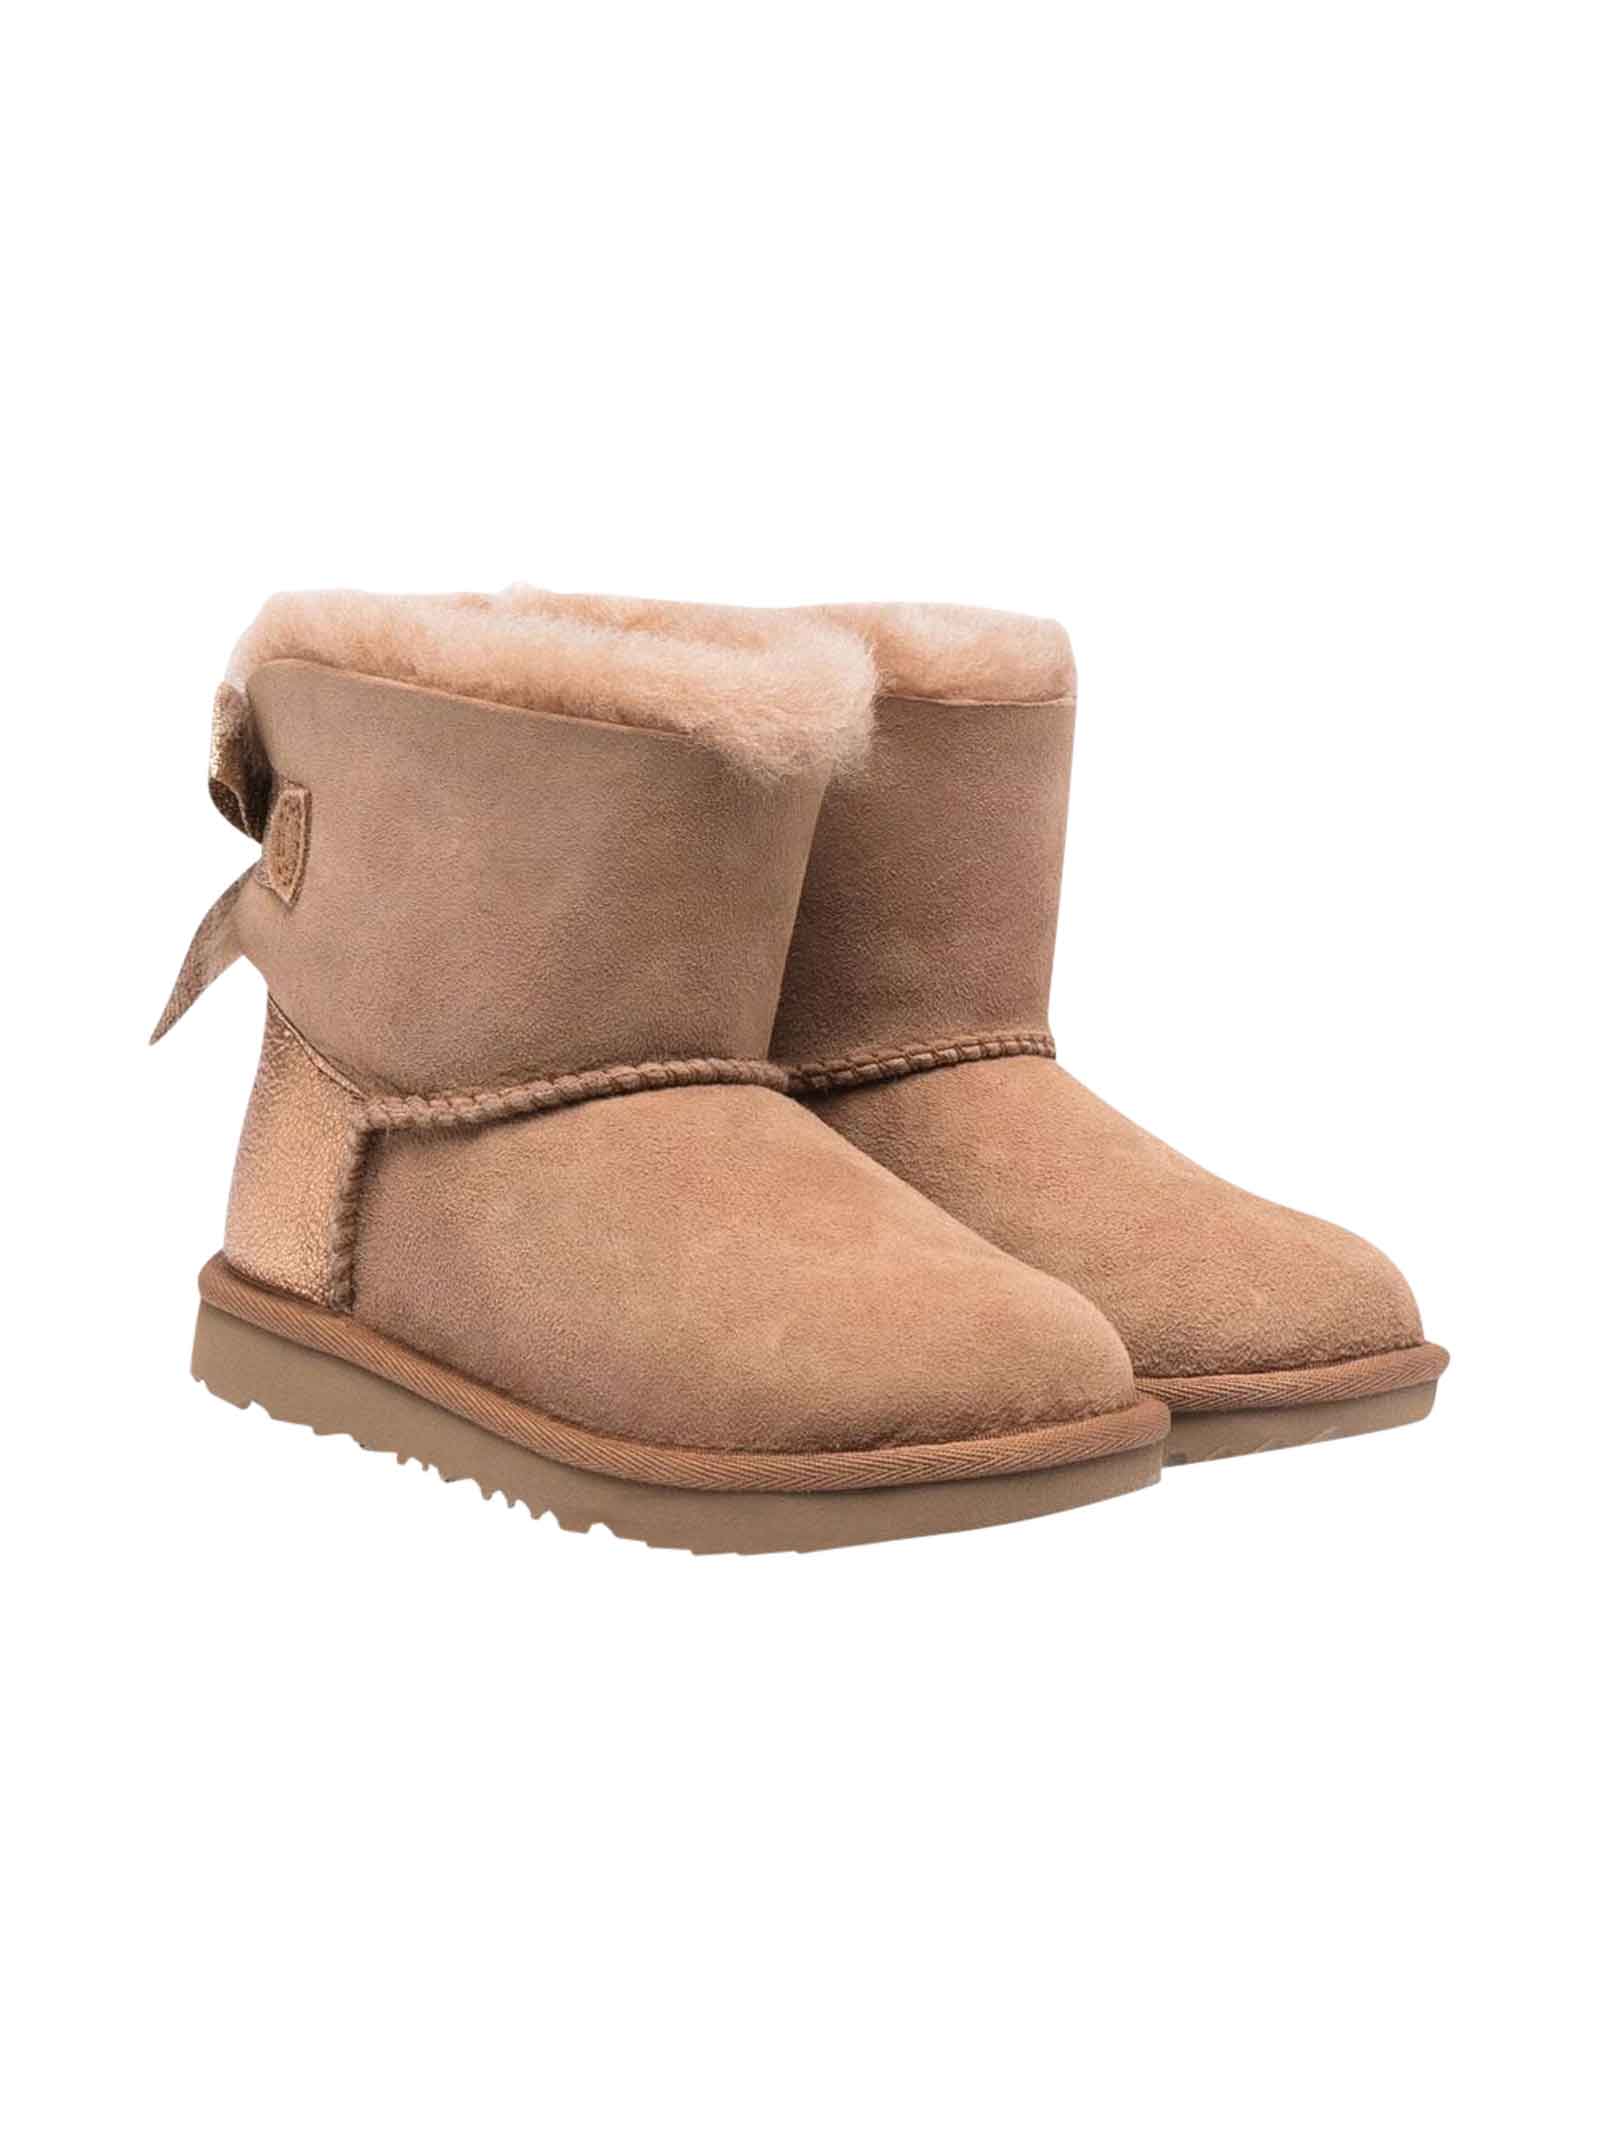 UGG Brown Shoes